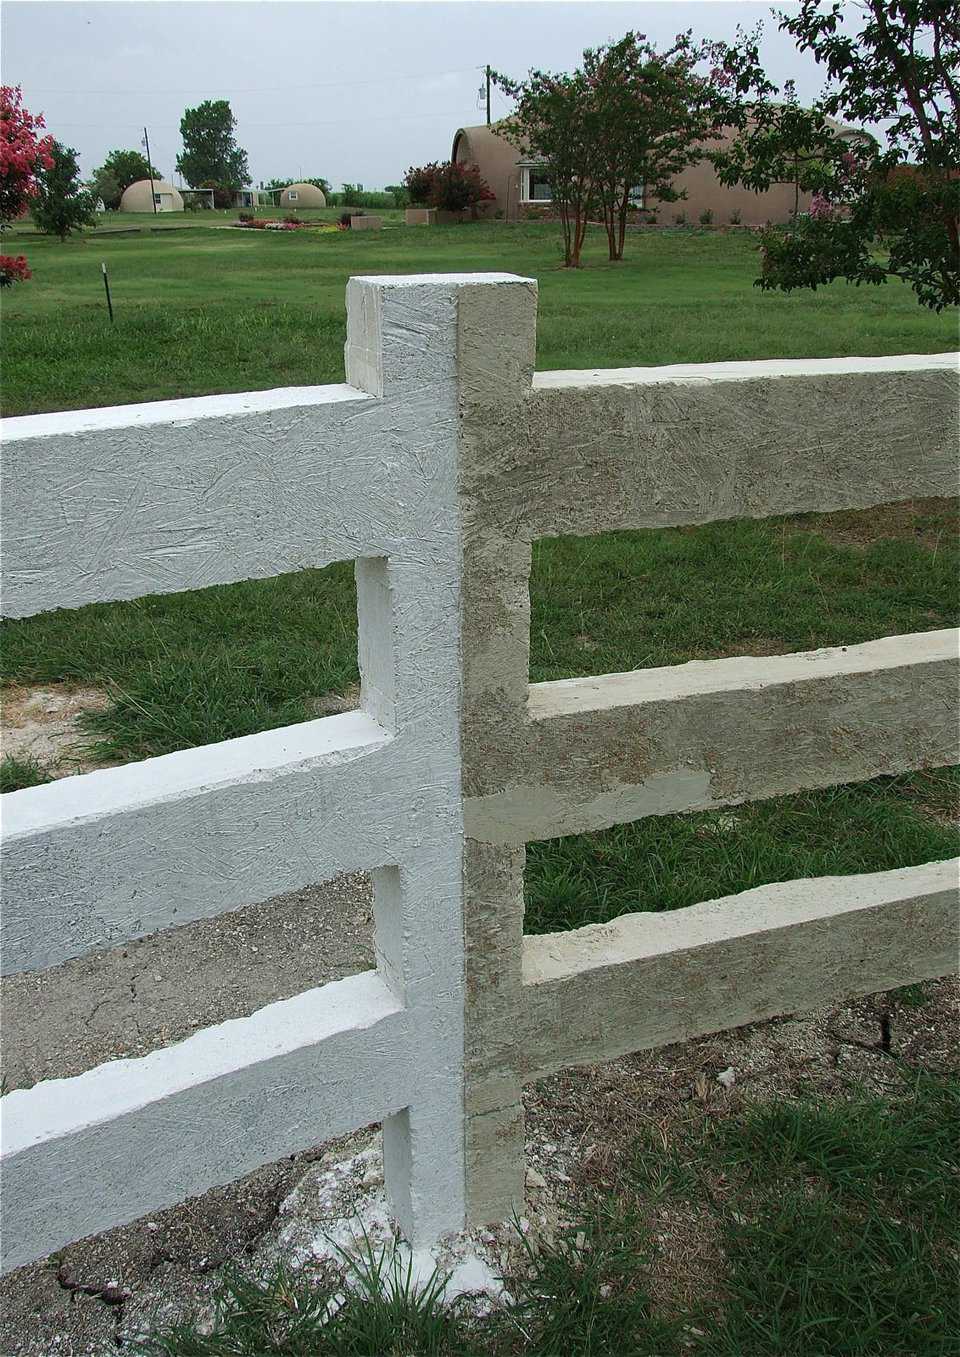 This middle section post is divided to show a couple of different fence coloring options. The left half has a lime ingredient included in the mixture that was used to white wash the fence. The right section was left unpainted to reveal the sandy-white colorant used in the original mix. In actuallity, the fence will never require painting and could remain a sandy-white color.